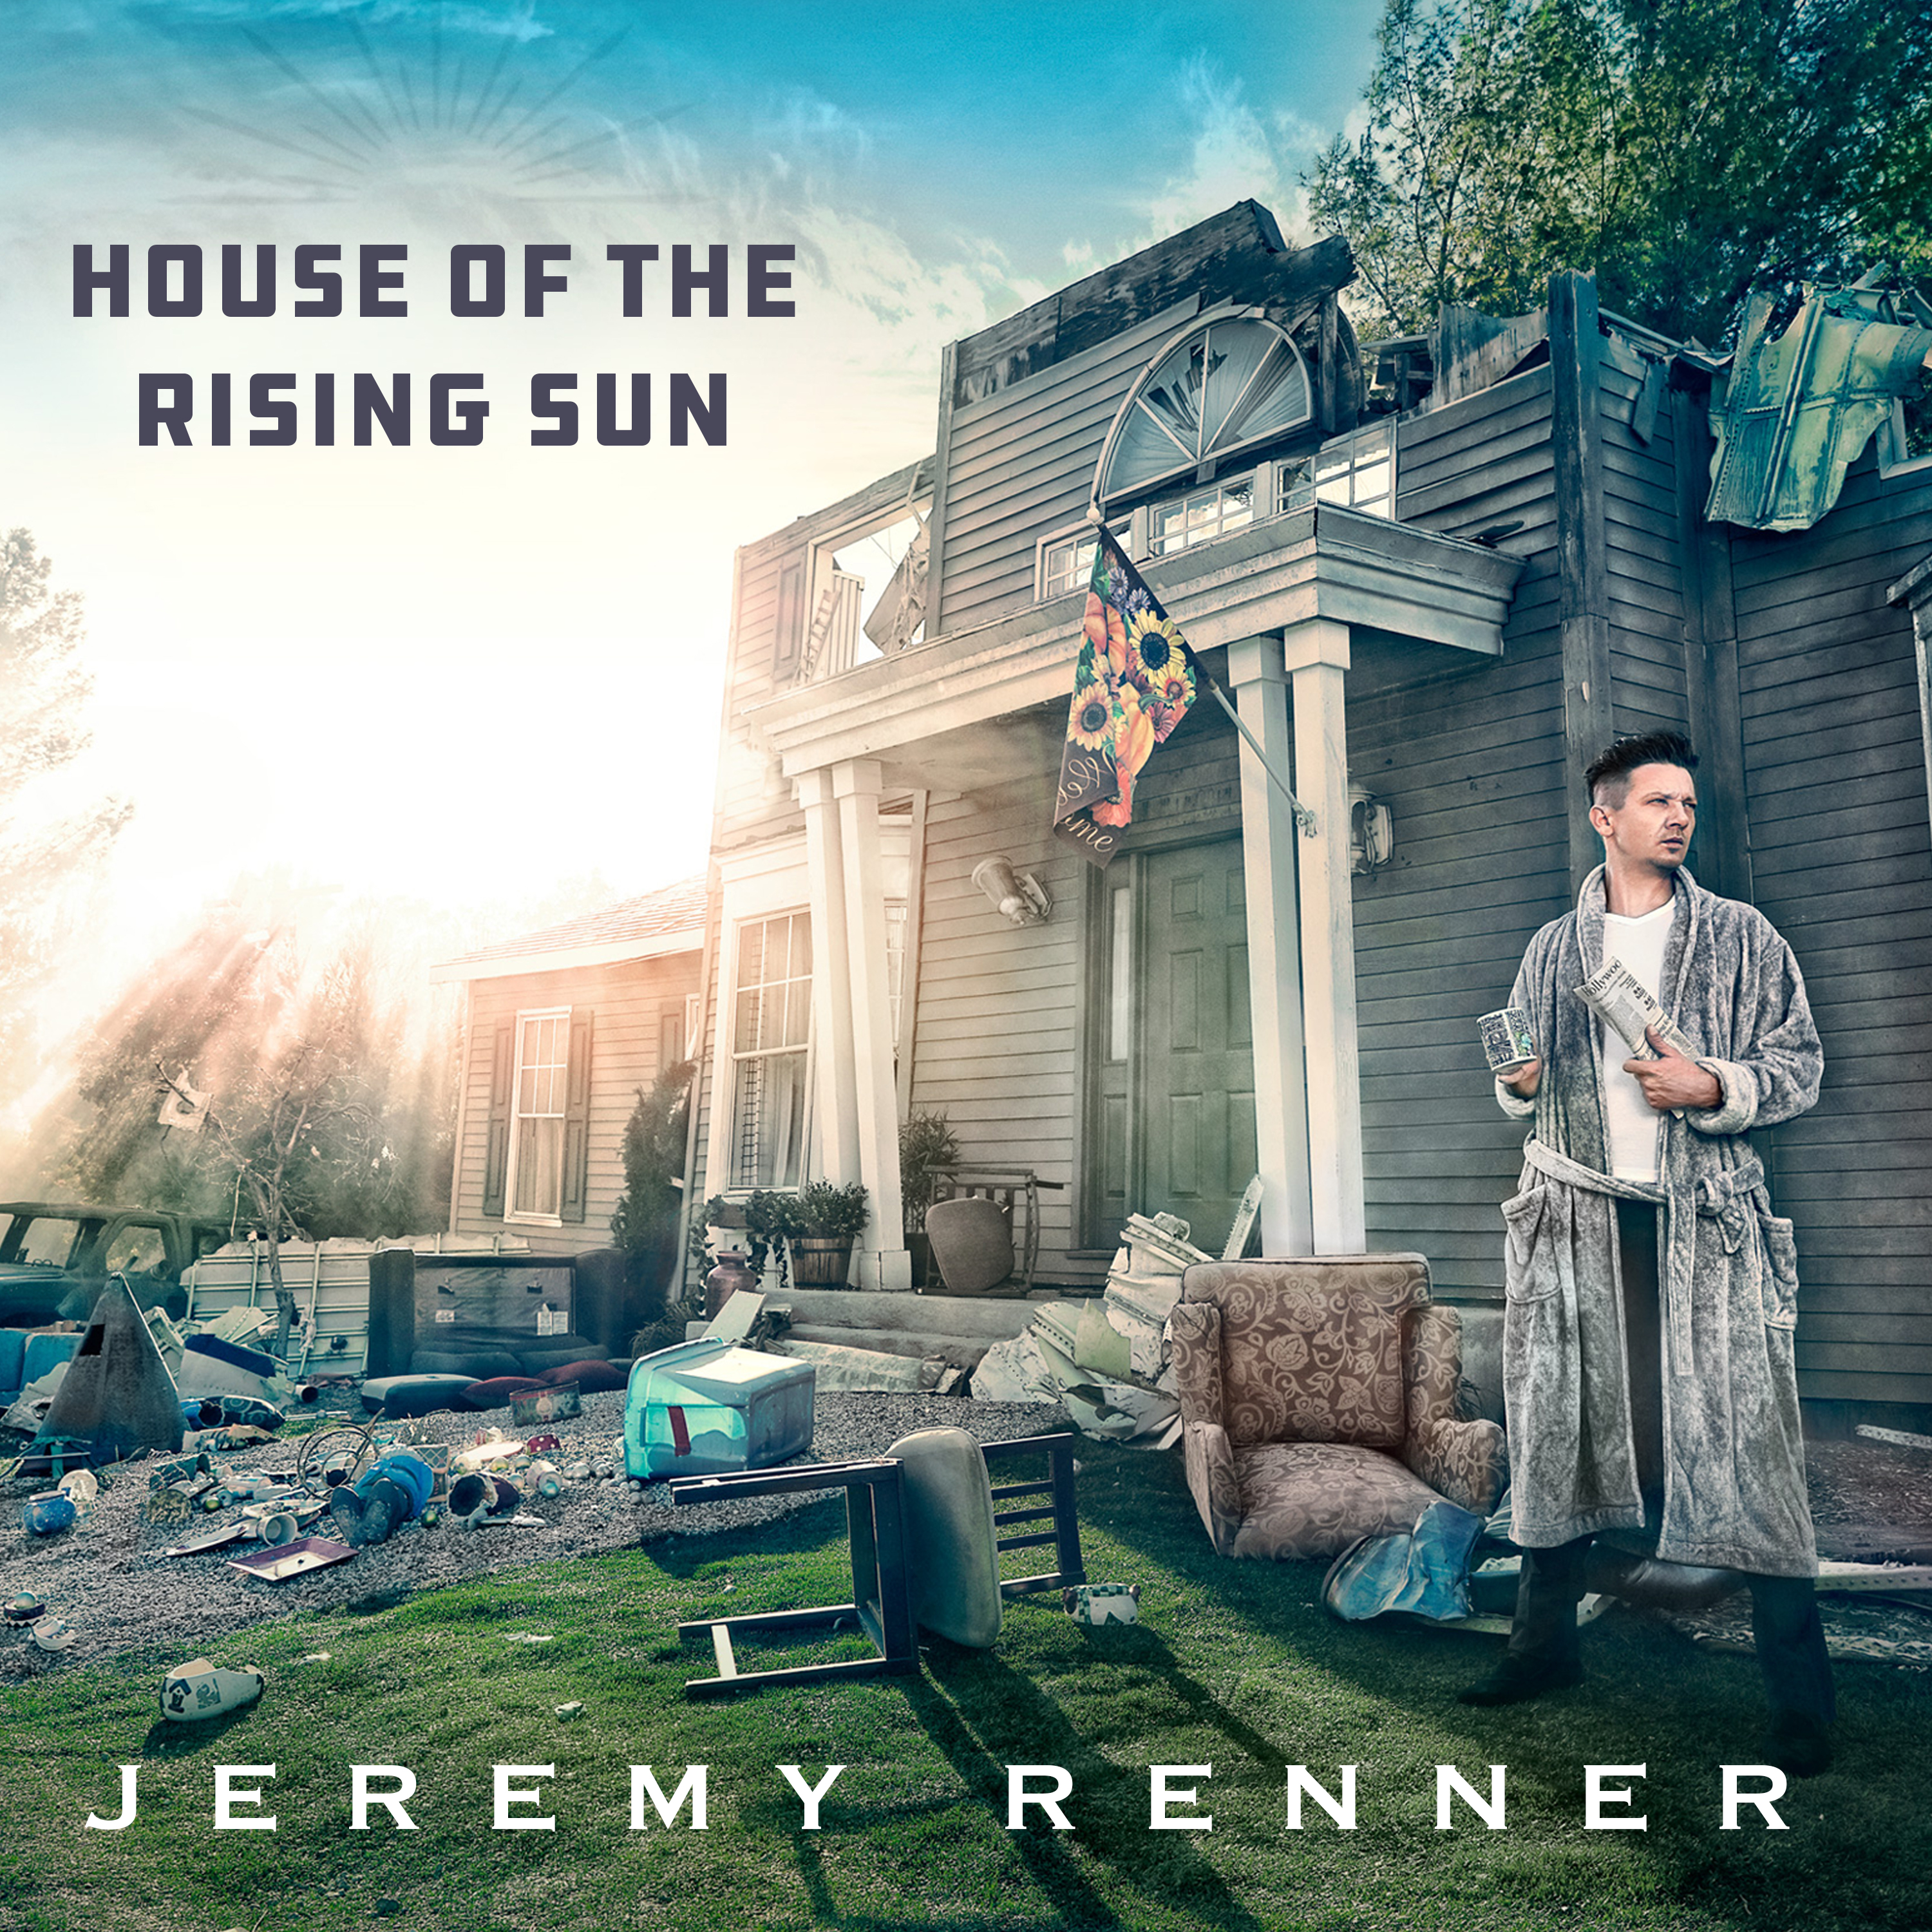 Jeremy renner singing house of the rising sun